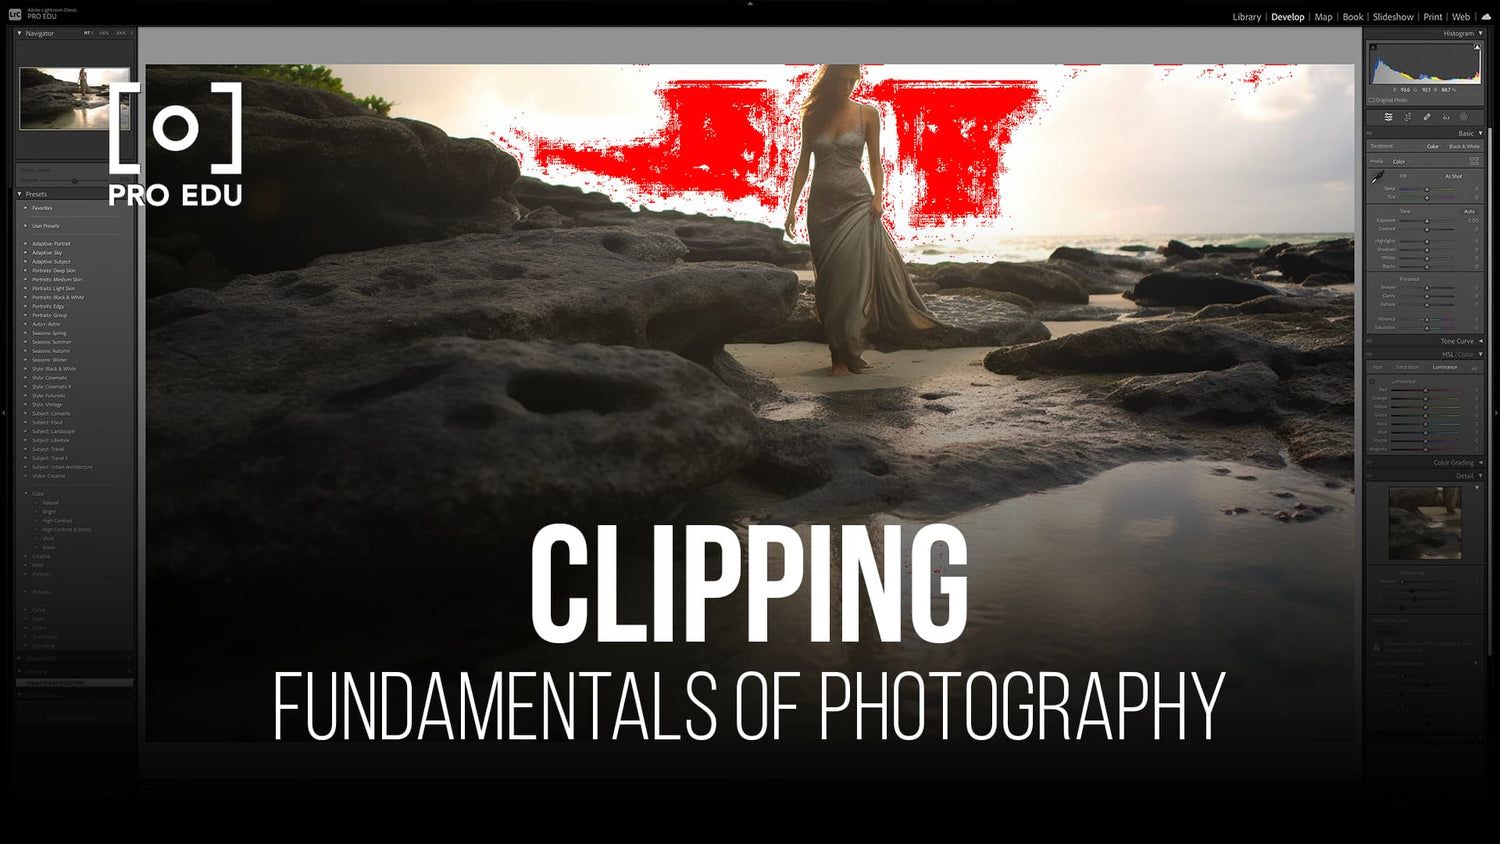 Understanding and avoiding clipping in photography for optimal image quality